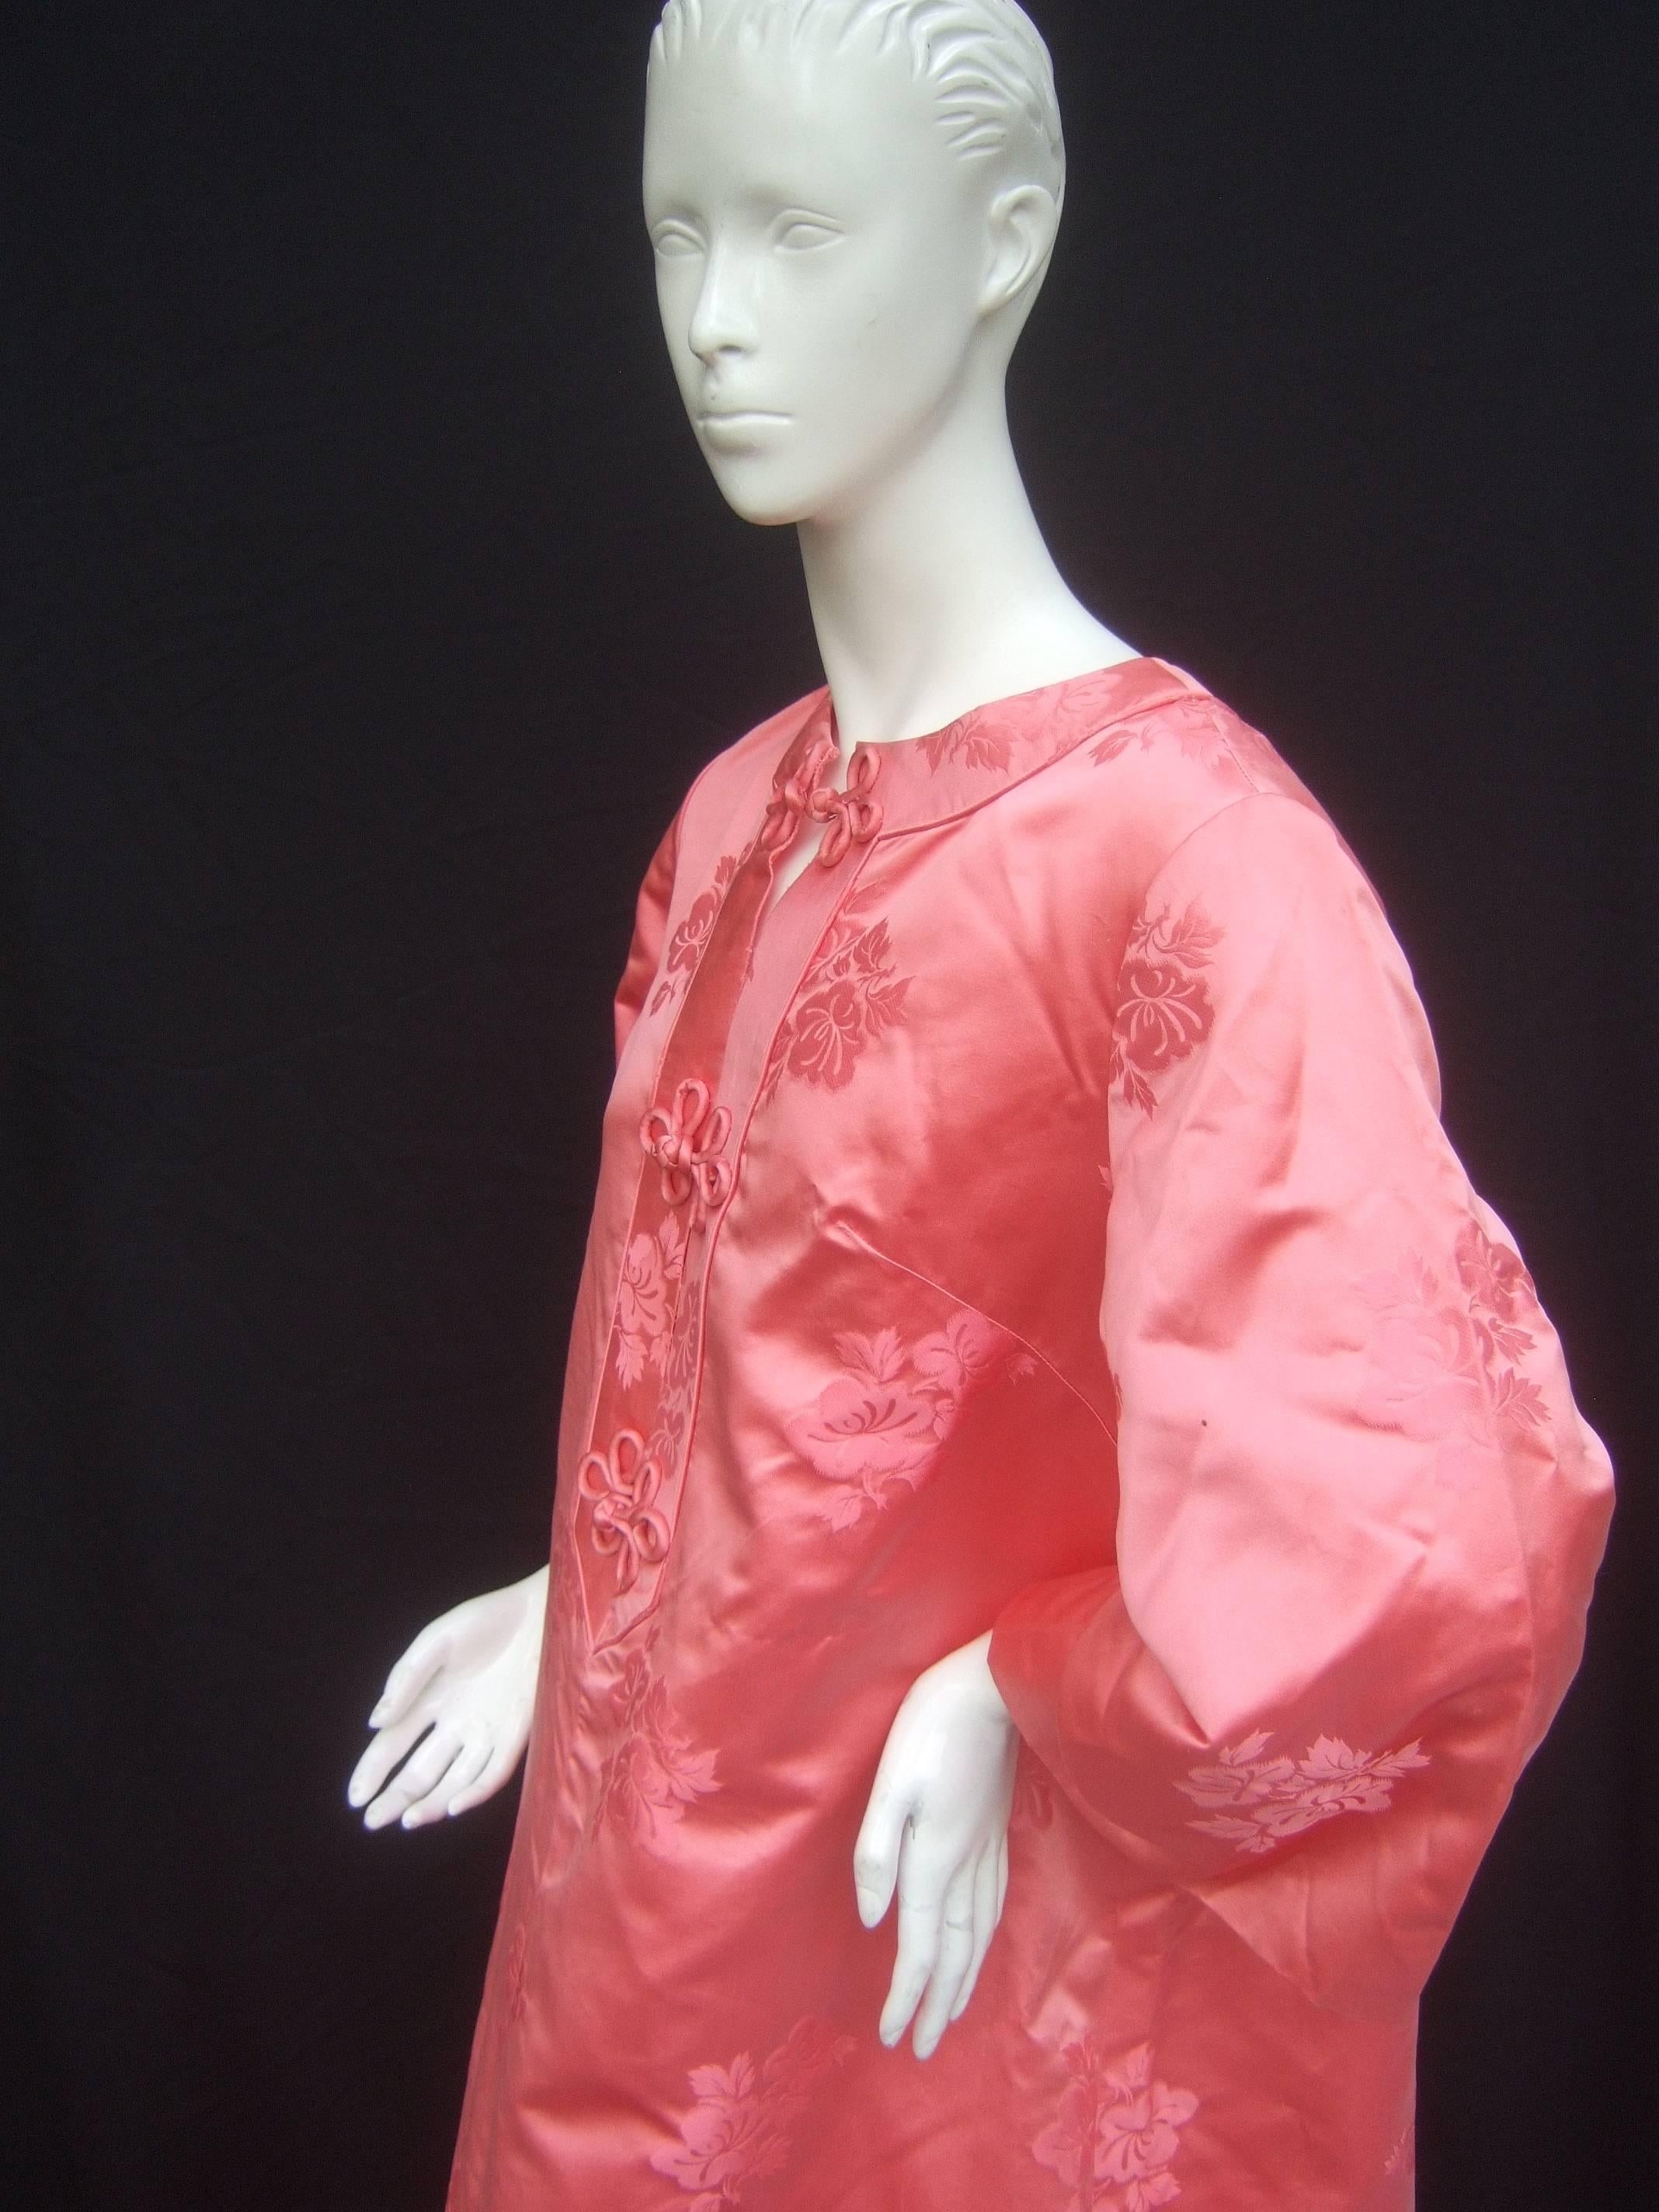 Coral pink satin damask caftan gown c 1970s
The Asian inspired caftan is designed with 
luminous pink satin with recurring subtle 
floral designs

The neckline is adorned with frog closures 
that run down the bodice. The luxurious 
caftan is lined